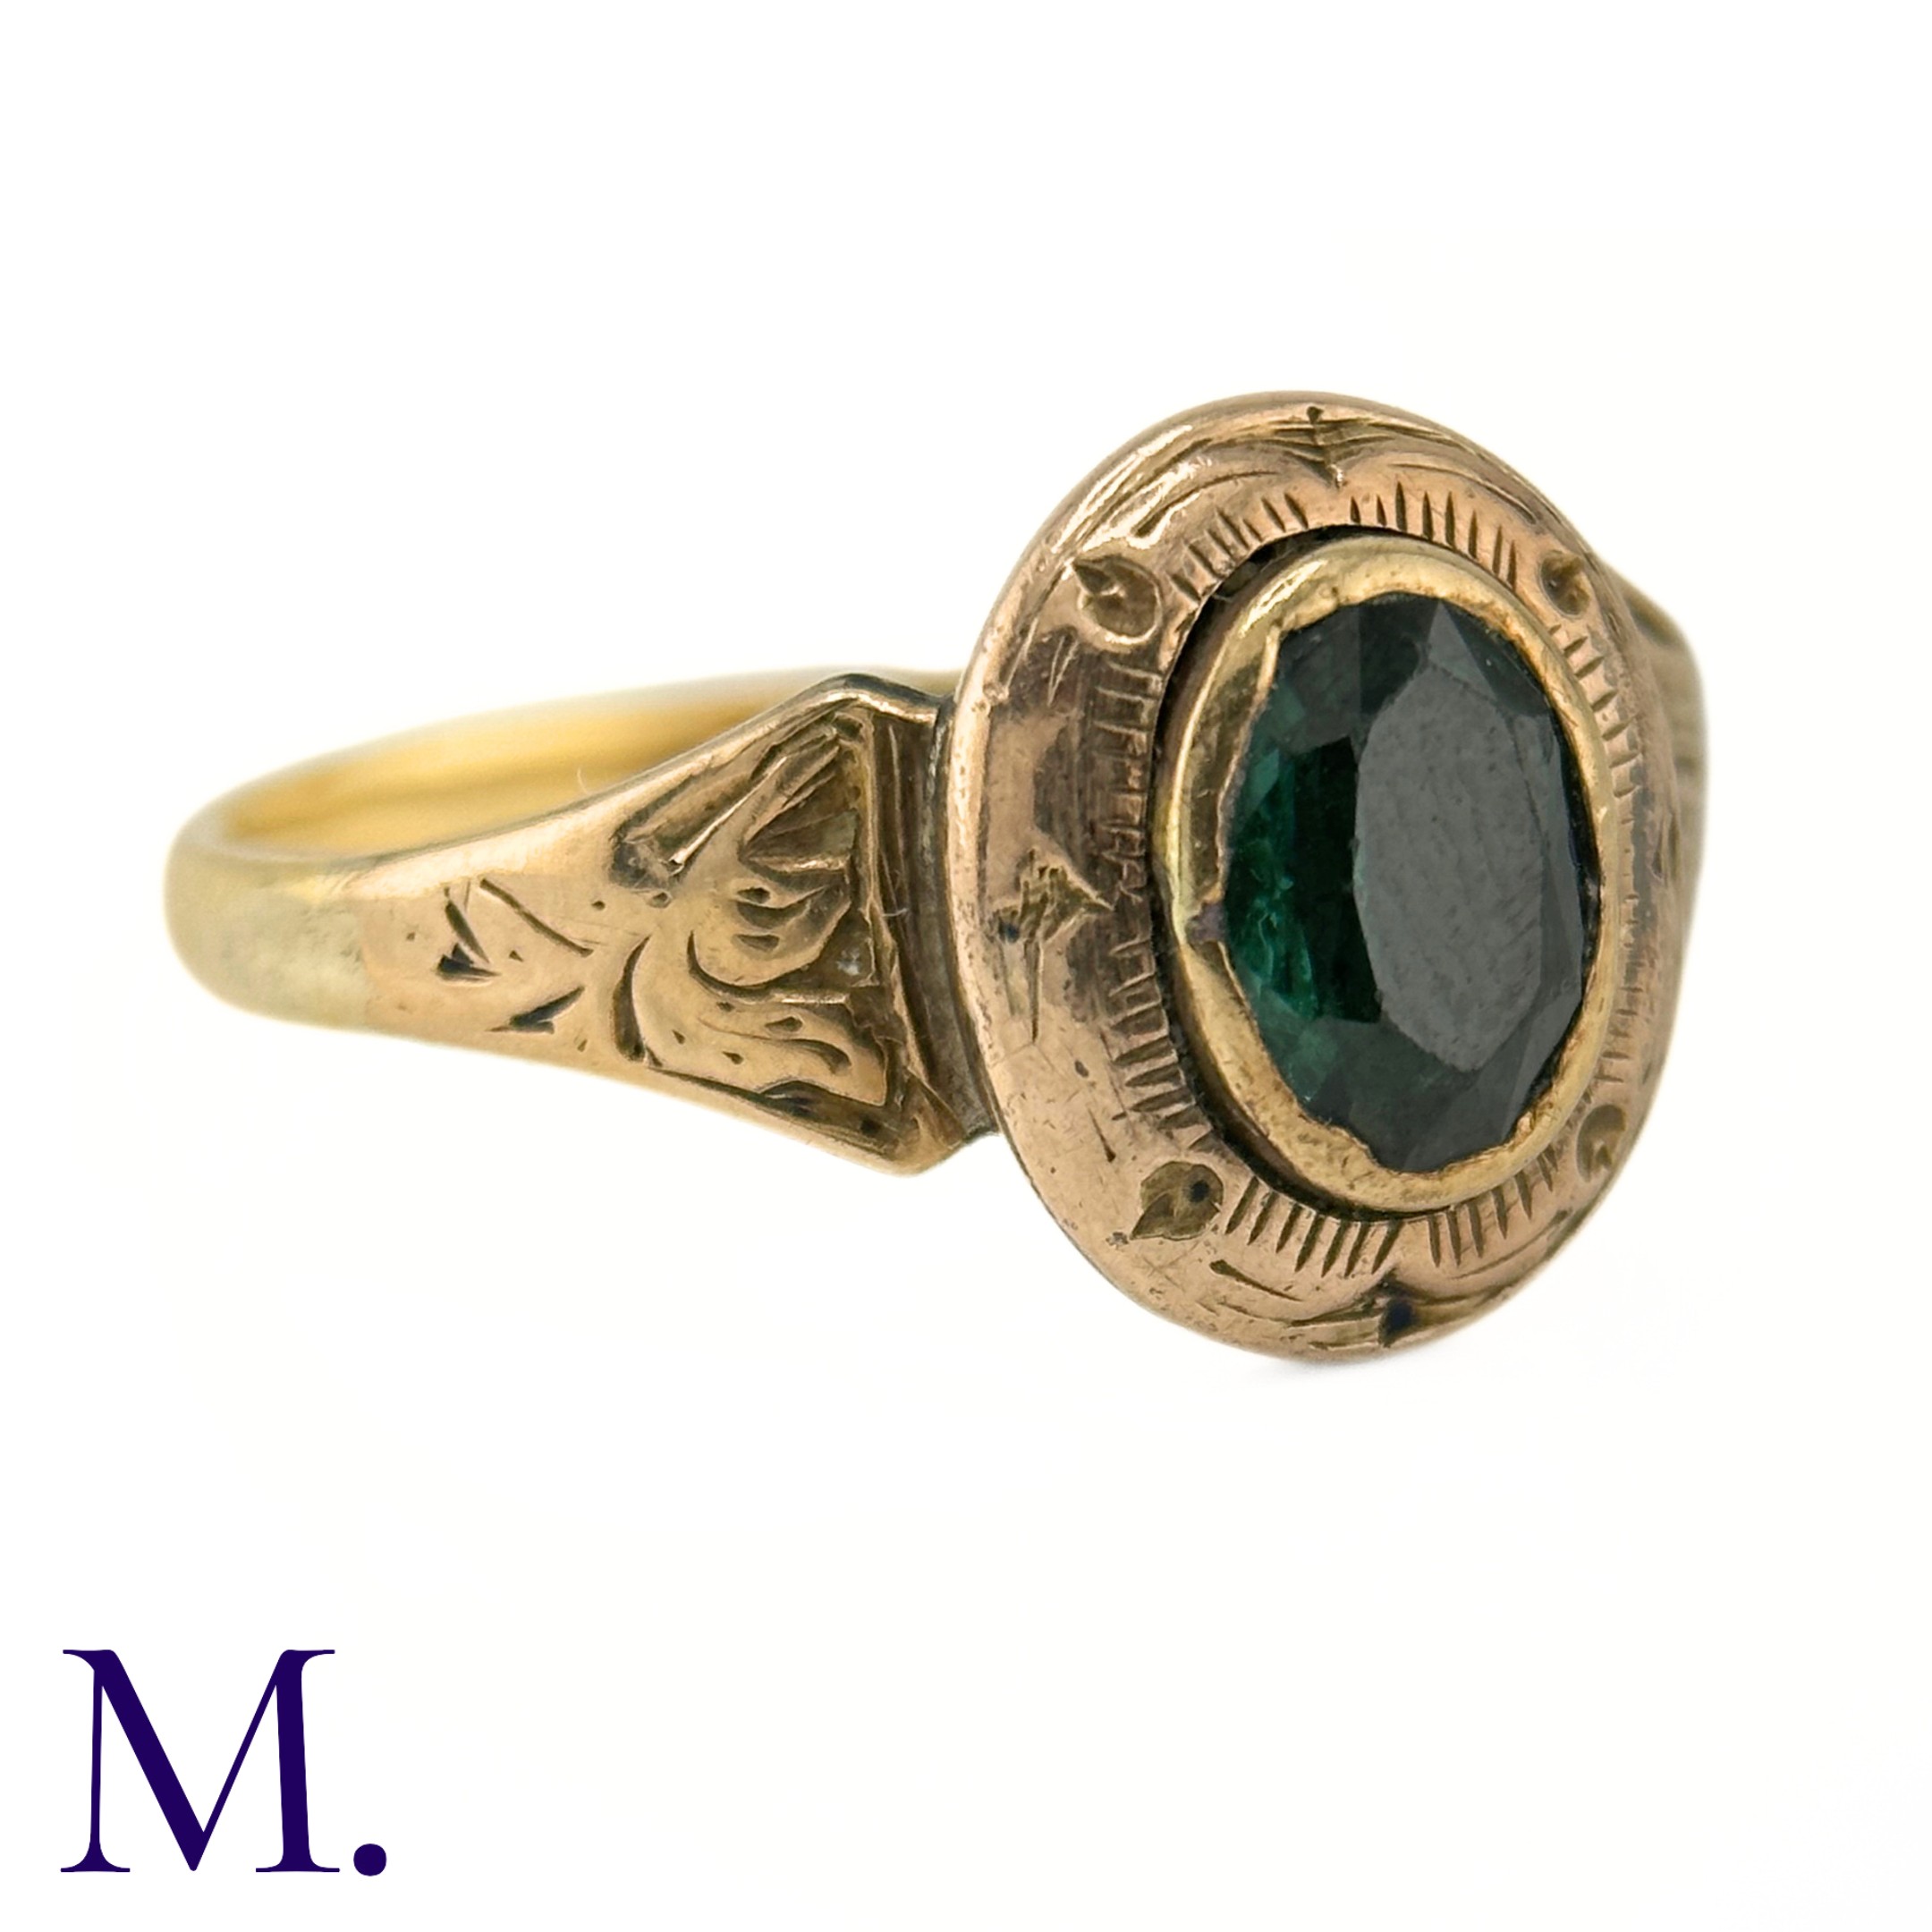 An Antique Green Tourmaline Ring The gold ring is set with an oval green tourmaline and the band and - Image 4 of 6